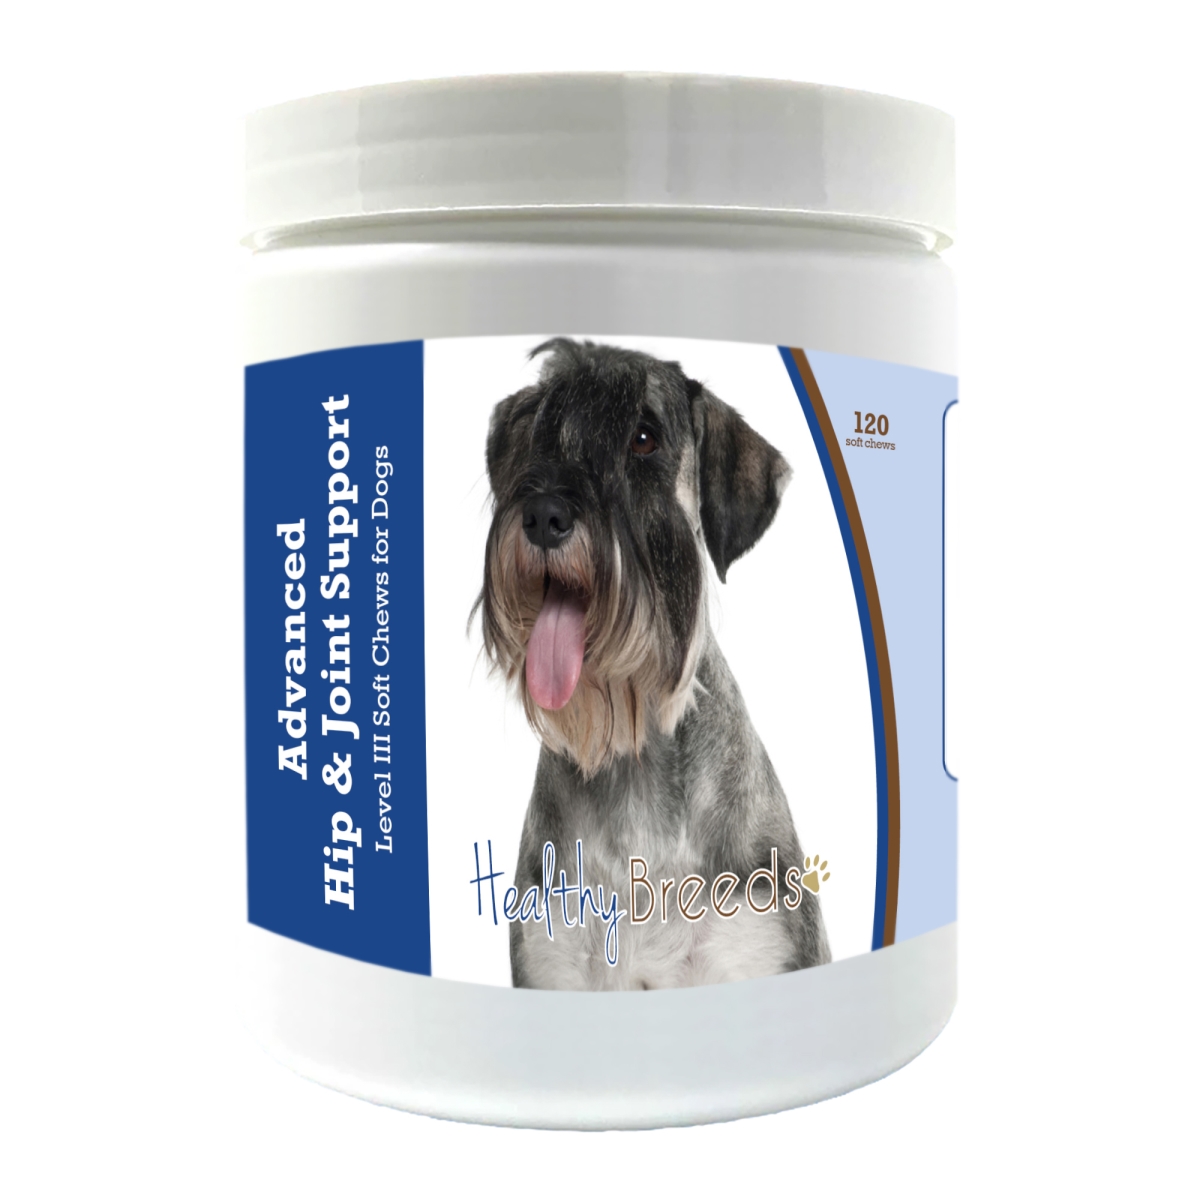 Picture of Healthy Breeds 192959899306 Standard Schnauzer Advanced Hip & Joint Support Level III Soft Chews for Dogs